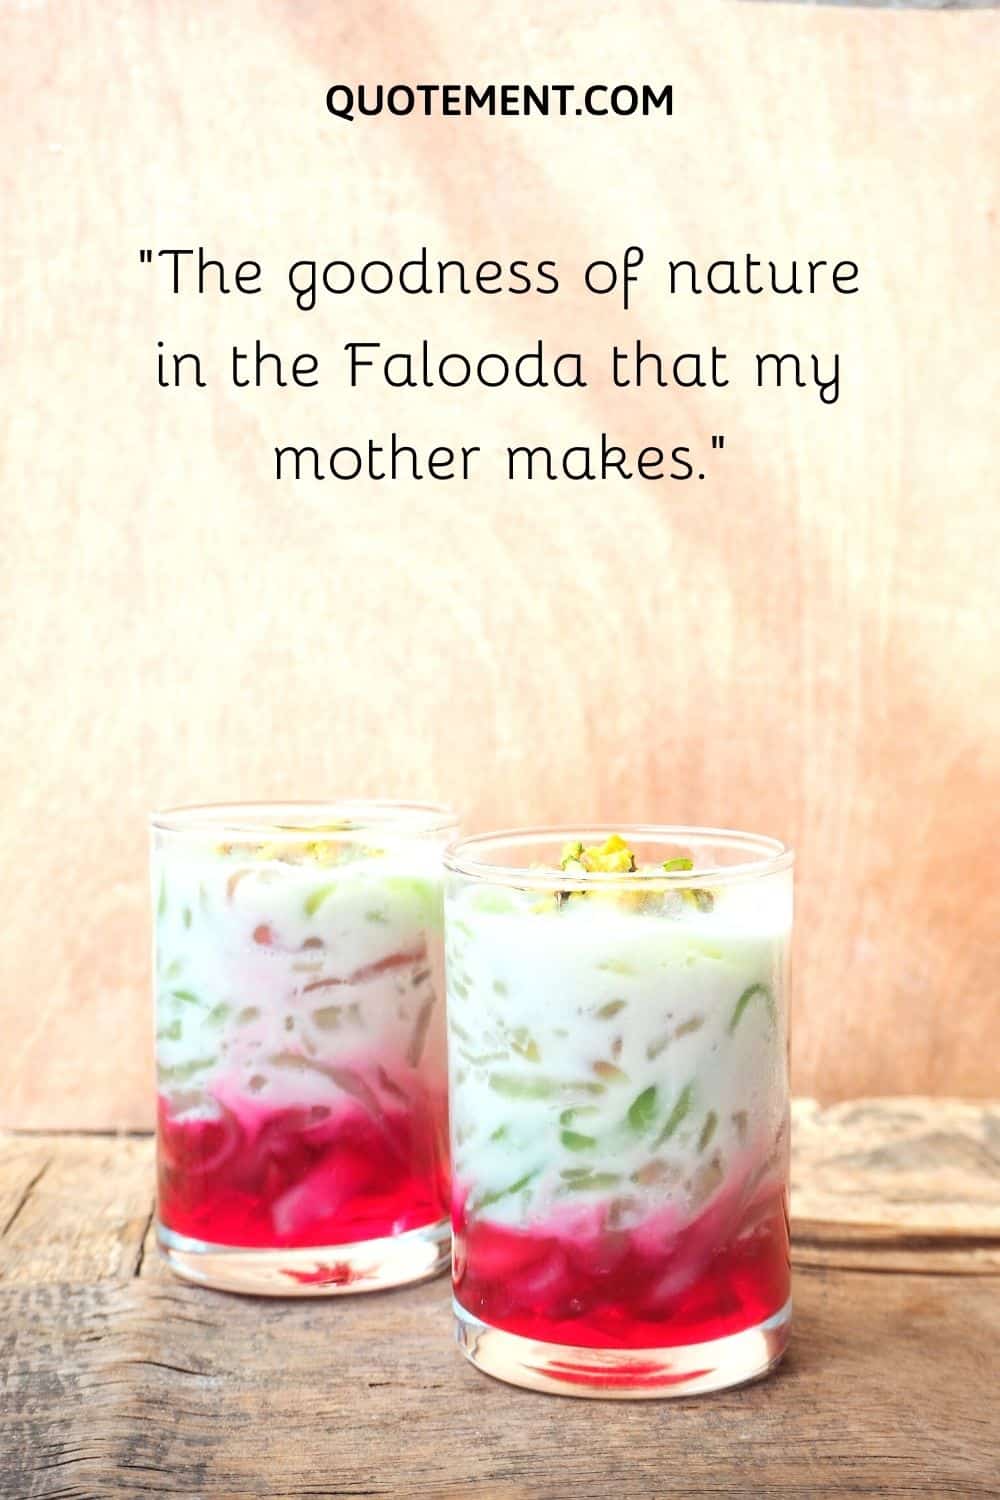 The goodness of nature in the Falooda that my mother makes